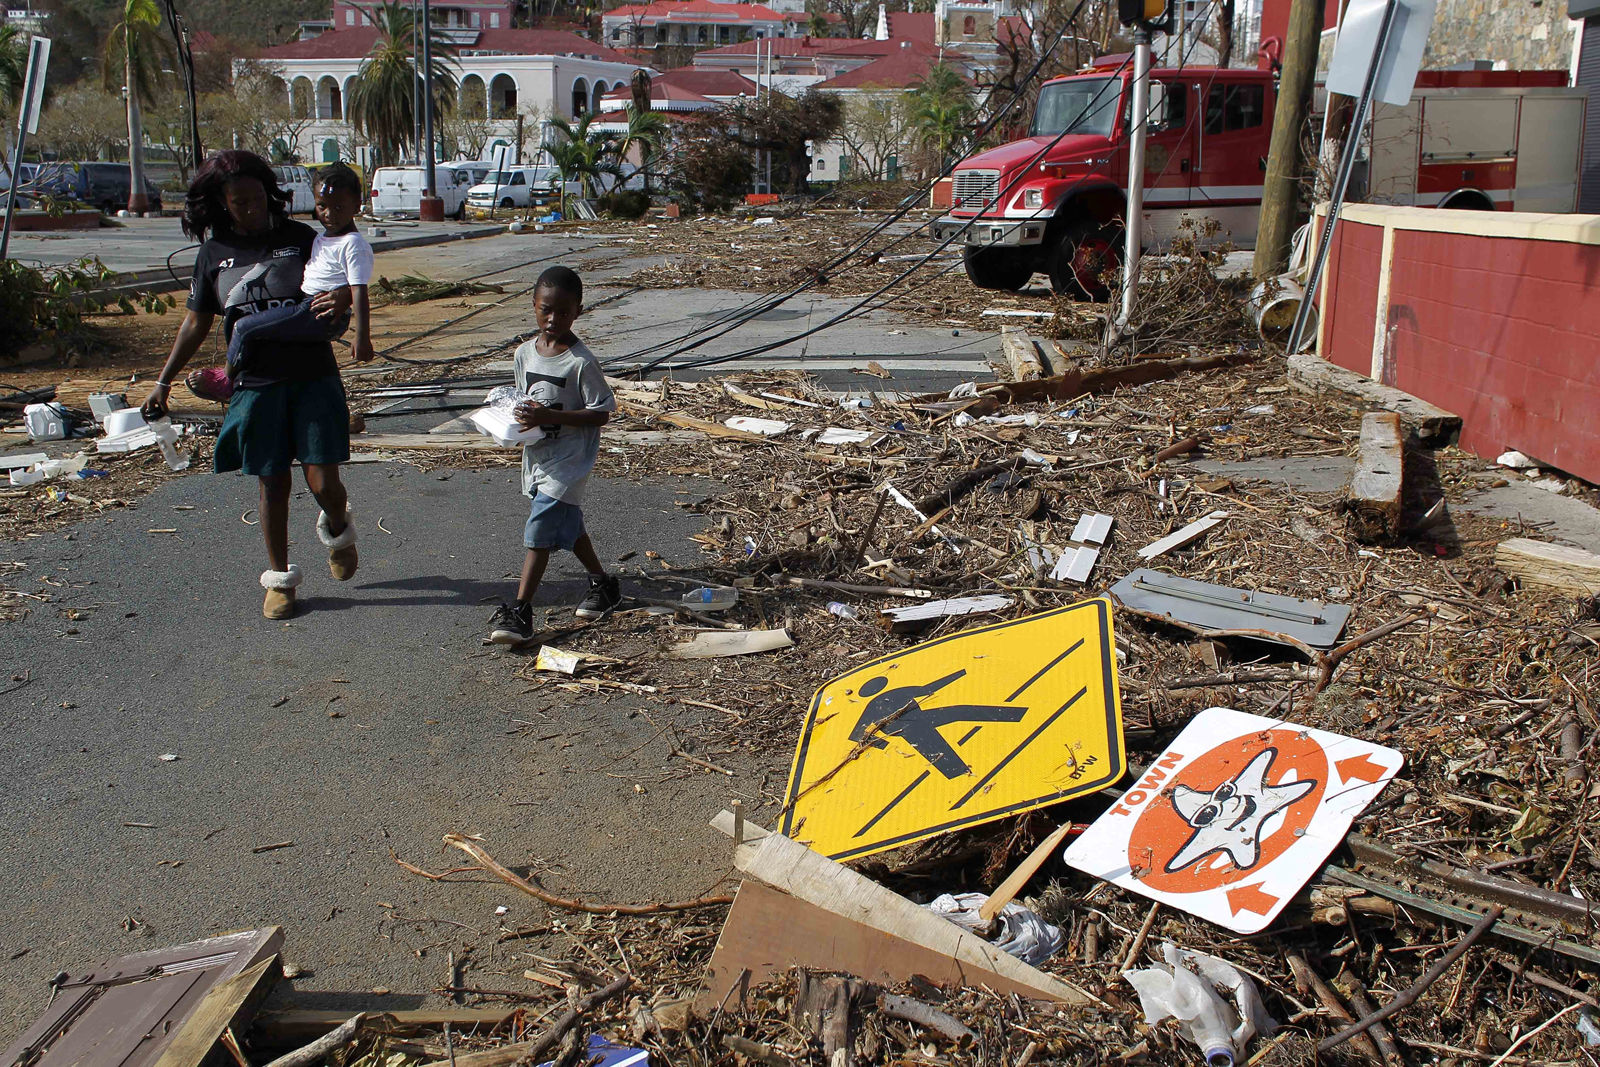 A woman with her two children walk past debris left by Hurricane Irma in Charlotte Amalie, St. Thomas, U.S. Virgin Islands, Sunday, Sept. 10, 2017.  The storm ravaged such lush resort islands as St. Martin, St. Barts, St. Thomas, Barbuda and Anguilla. (AP Photo/Ricardo Arduengo)